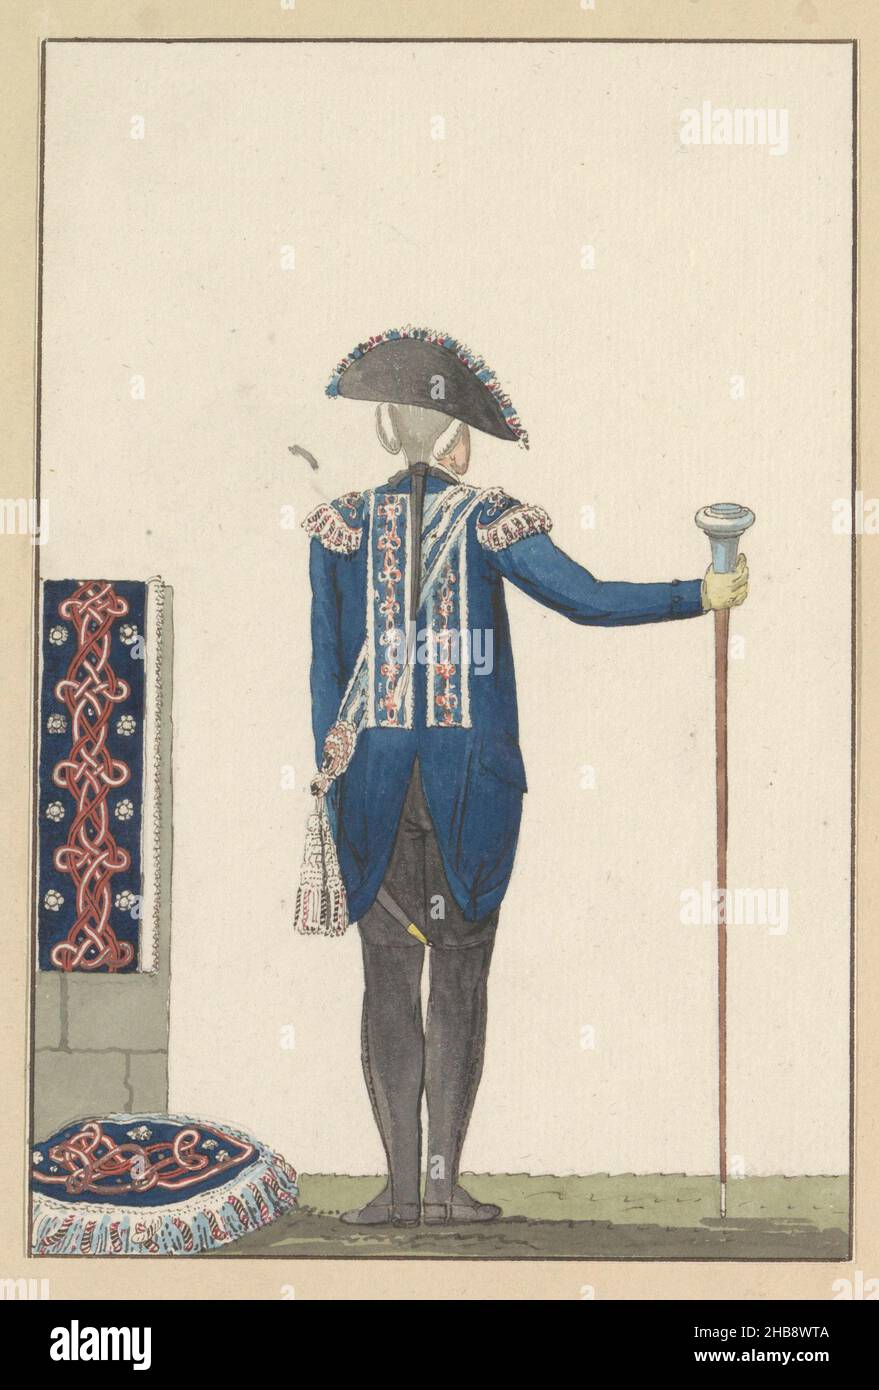 Tamboer majoor van het Genootschap tot Nut der Schutterij te Amsterdam, 1787, From behind (title on object), Tamboer majoor, standing with the baton in his right hand resting on the ground, seen from behind. On the left details of decorations and the epaulette. Part of the album with fourteen pasted-in coloured drawings of the uniforms of marksmen of the Patriot Society for the Benefit of the Shooters in Amsterdam in the year 1787., draughtsman: anonymous, Amsterdam, 1787, paper, height 206 mm × width 139 mm Stock Photo